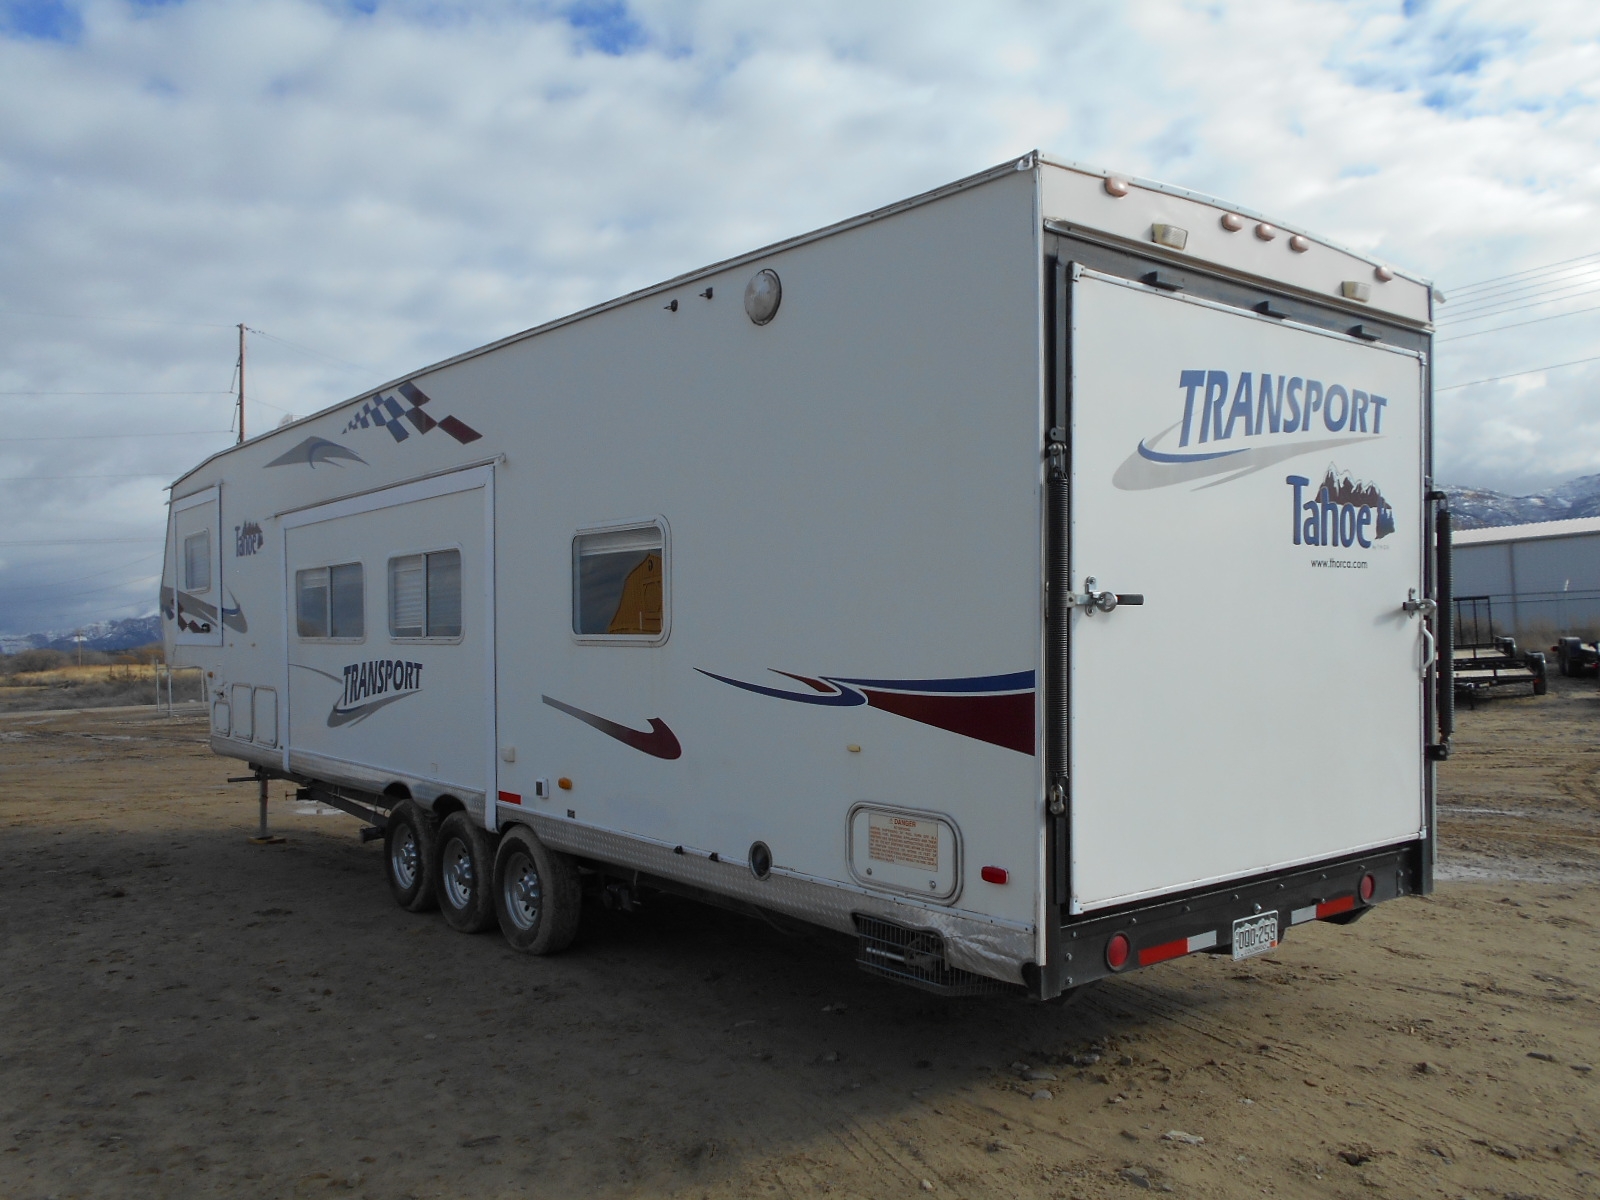 8 Photos Tahoe Transport Toy Hauler And Review - Alqu Blog 2005 Tahoe Transport Toy Hauler Specs